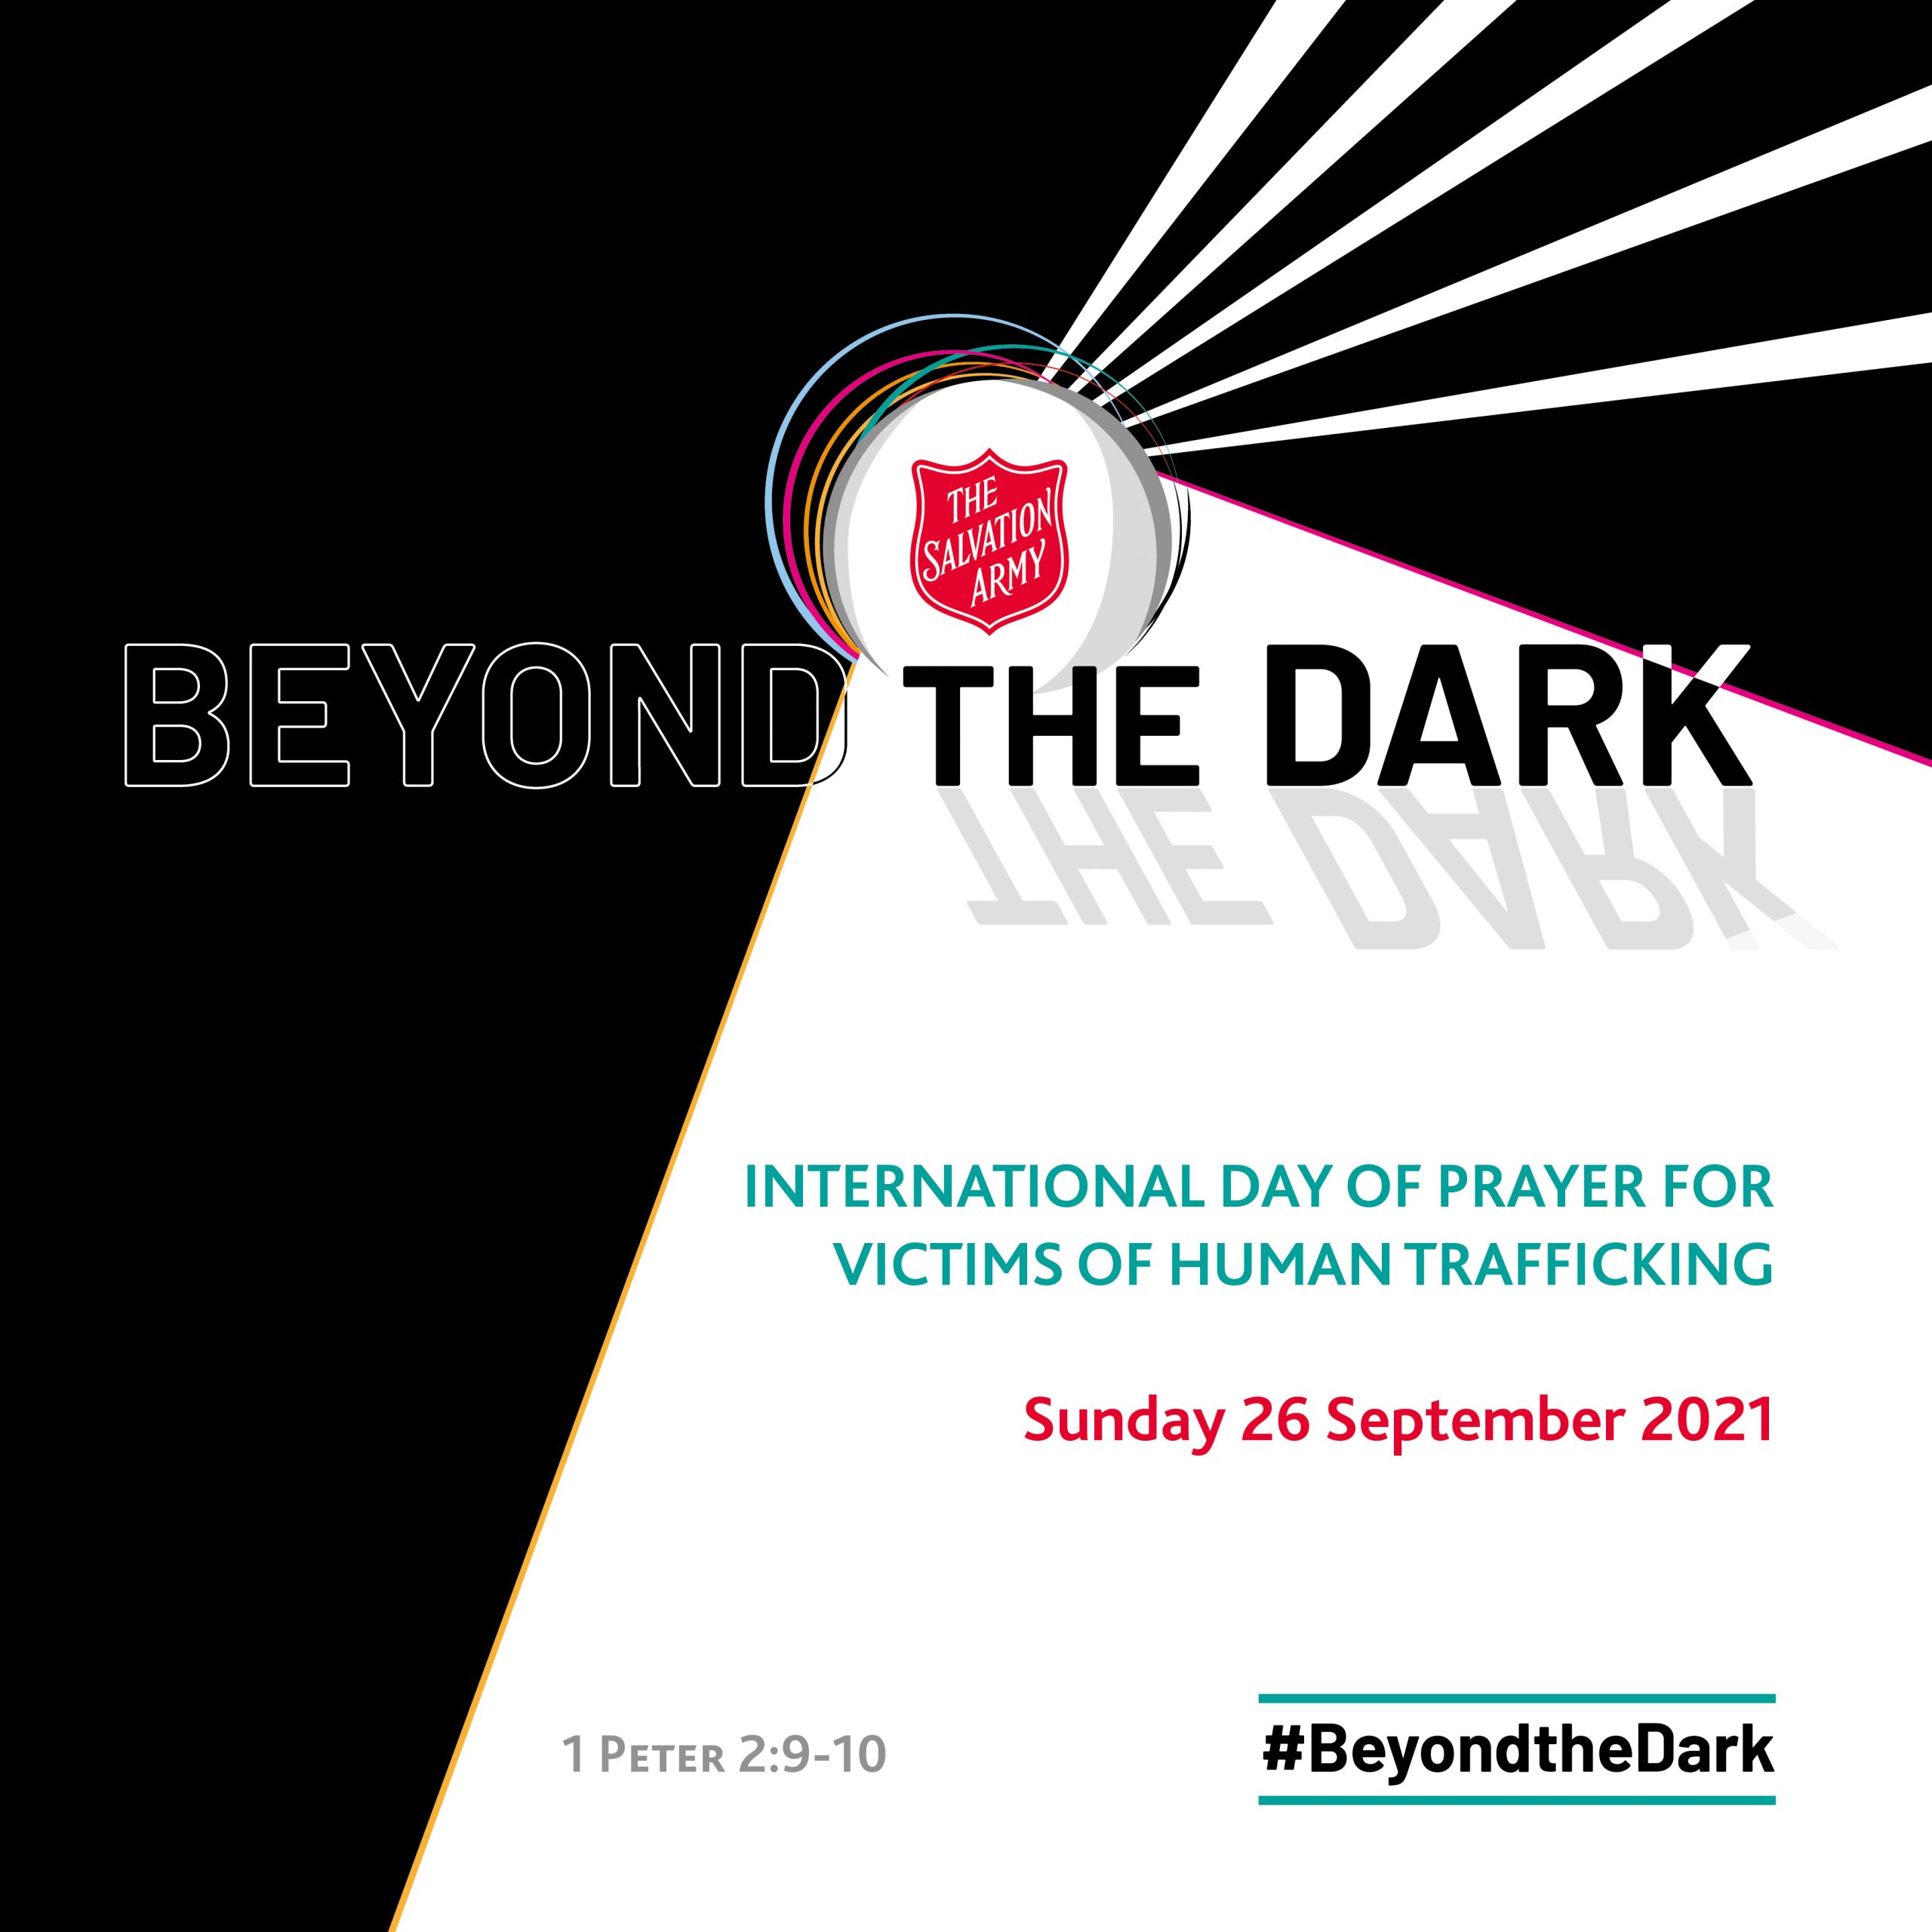 Linked to Beyond the Dark Social Media Square Image 1 of 3